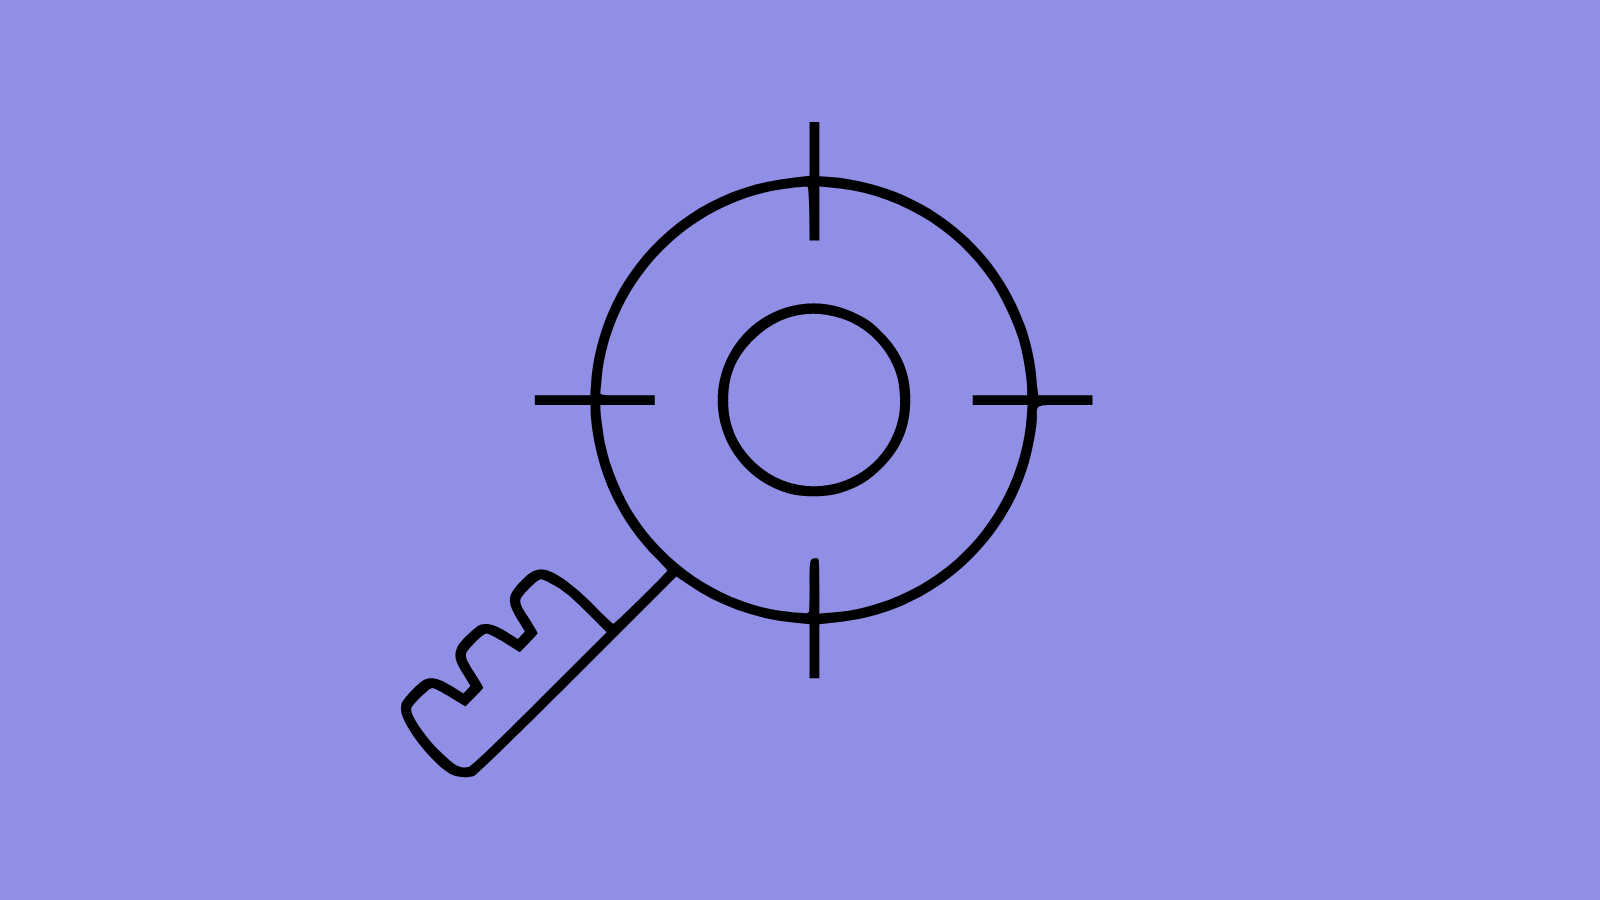 A graphic that combines a key and a crosshairs